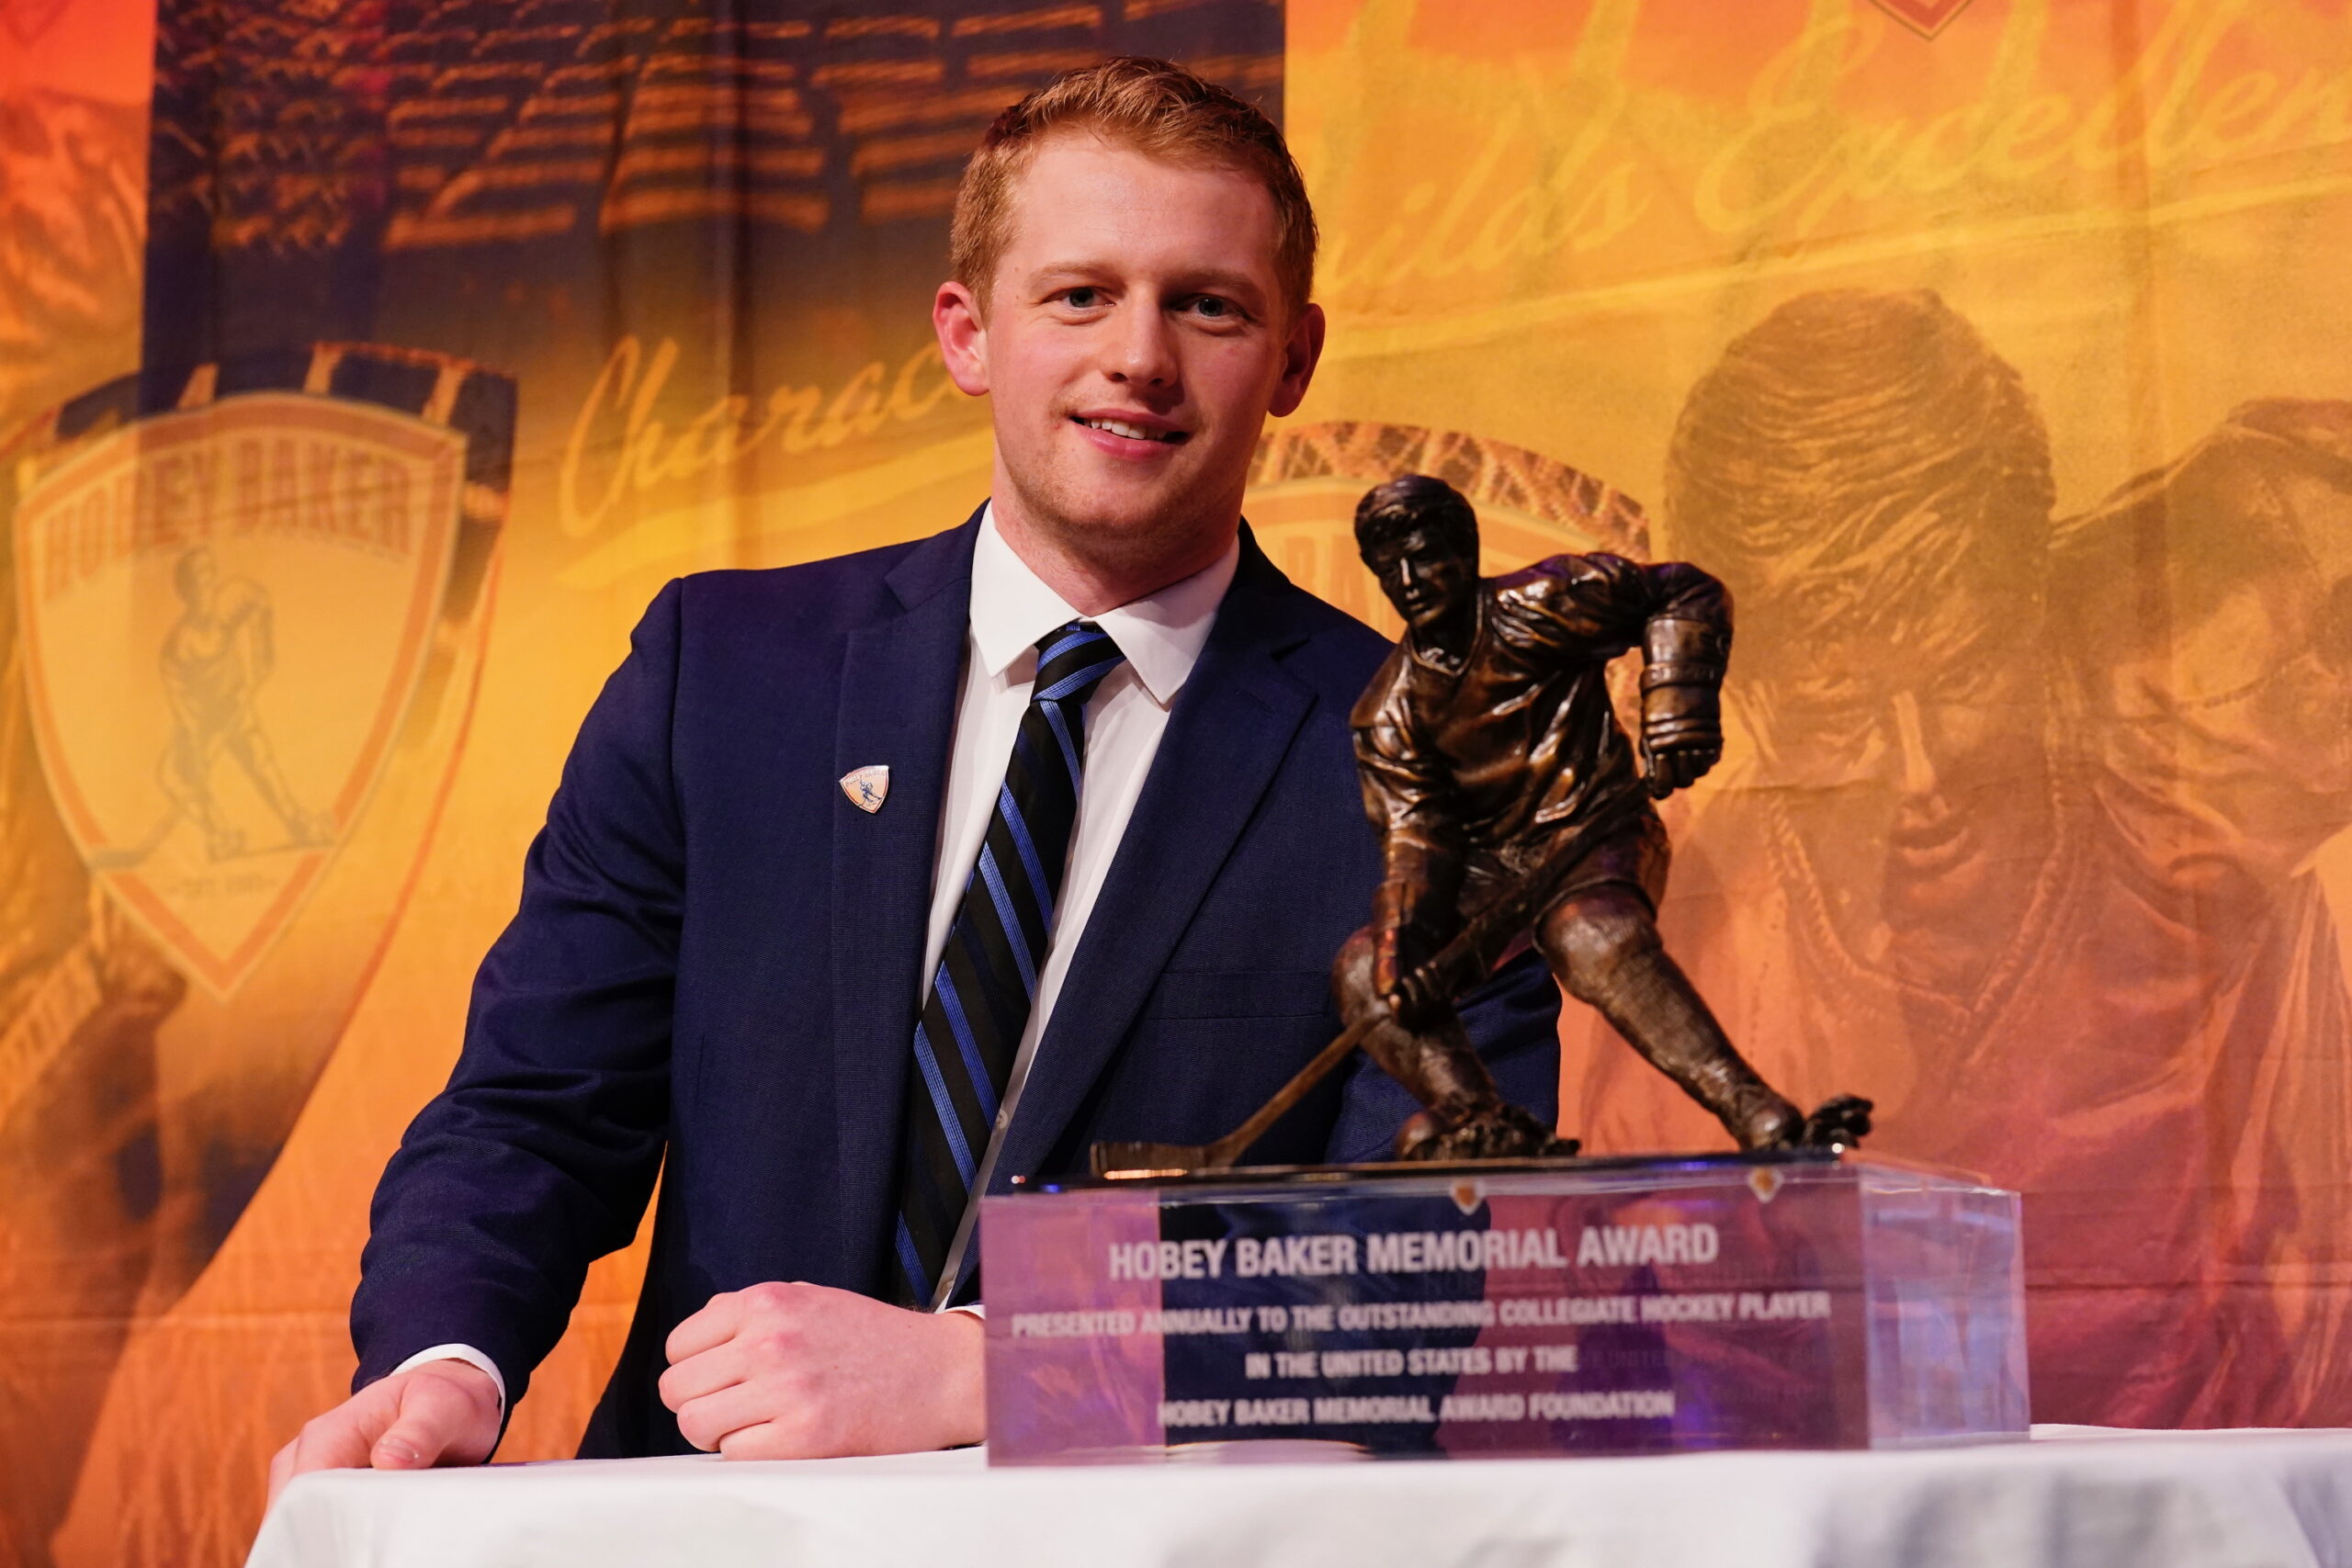 Three finalists for the 2019 Hobey Baker Award announced